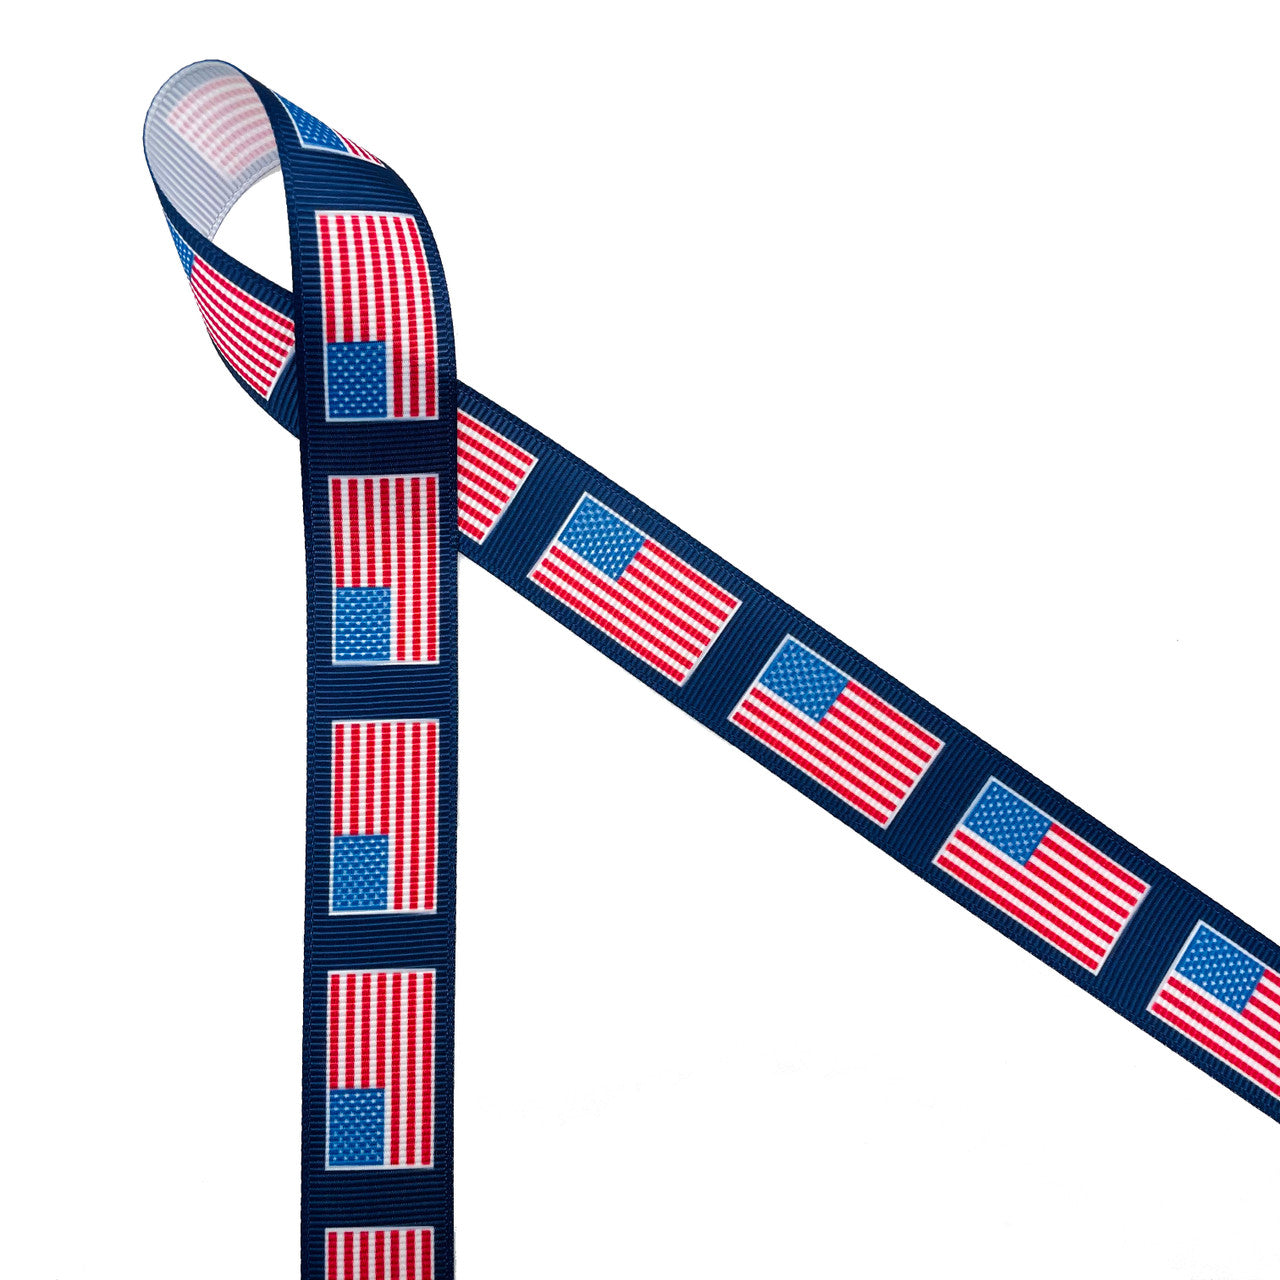 American Flags line up on a navy blue background printed on 7/8" white grosgrain ribbon for the perfect patriotic ribbon! This is an ideal ribbon for 4th of July, Memorial Day and Veterans Day. Use this ribbon for hair bows, wreaths, party decor and gift wrap for the biggest Summer holiday! All our ribbon is designed and printed in the USA